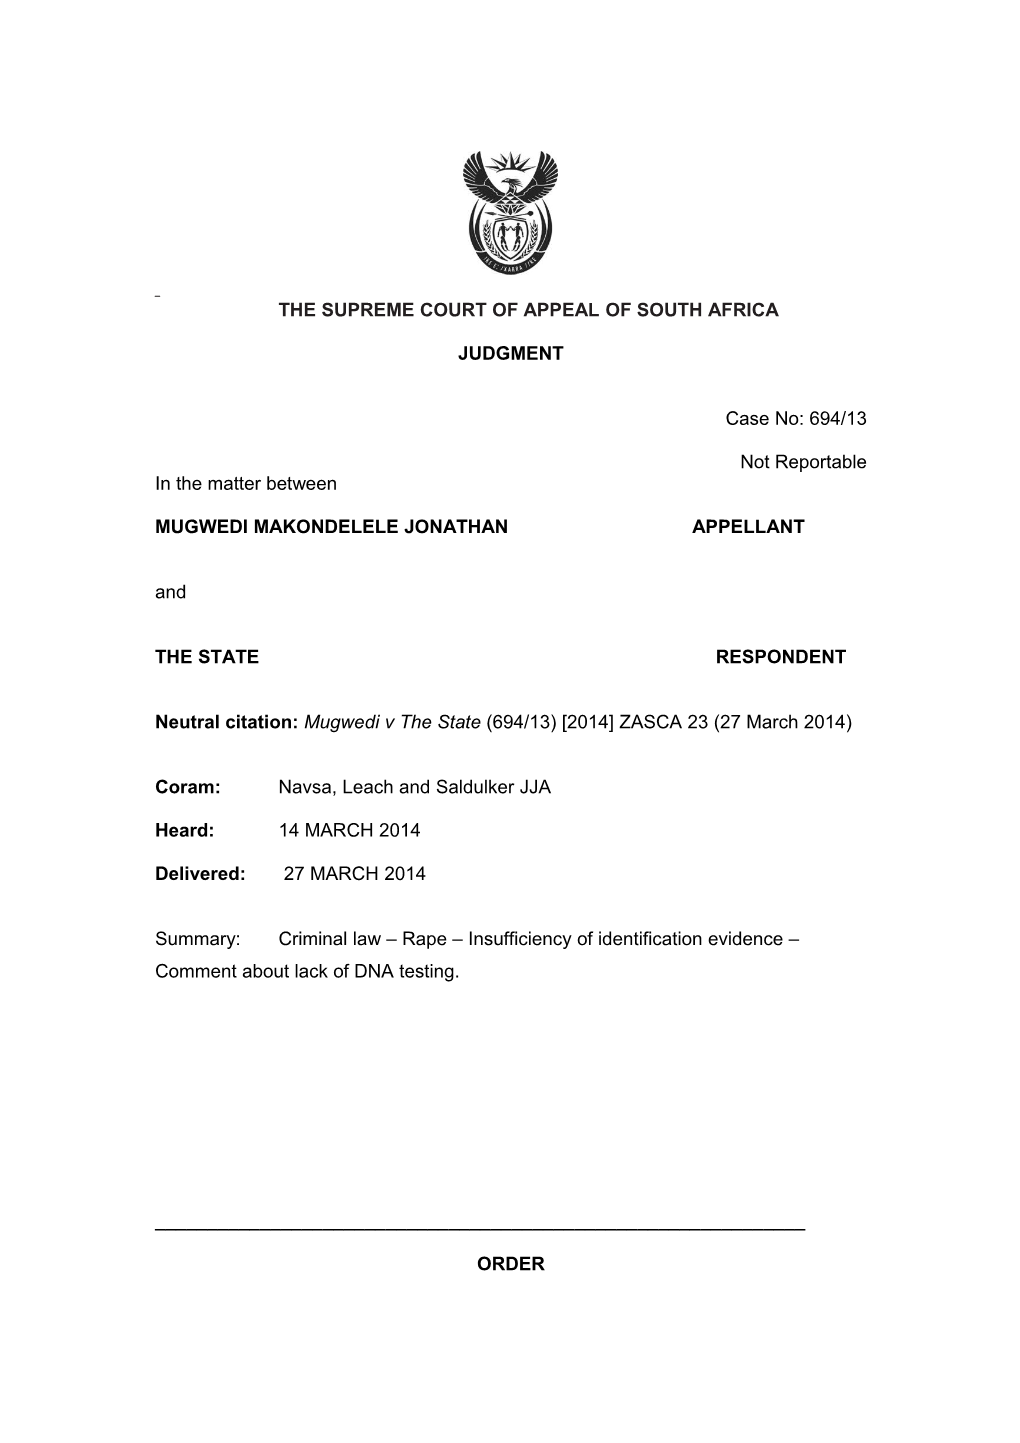 The Supreme Court of Appeal of South Africa s7